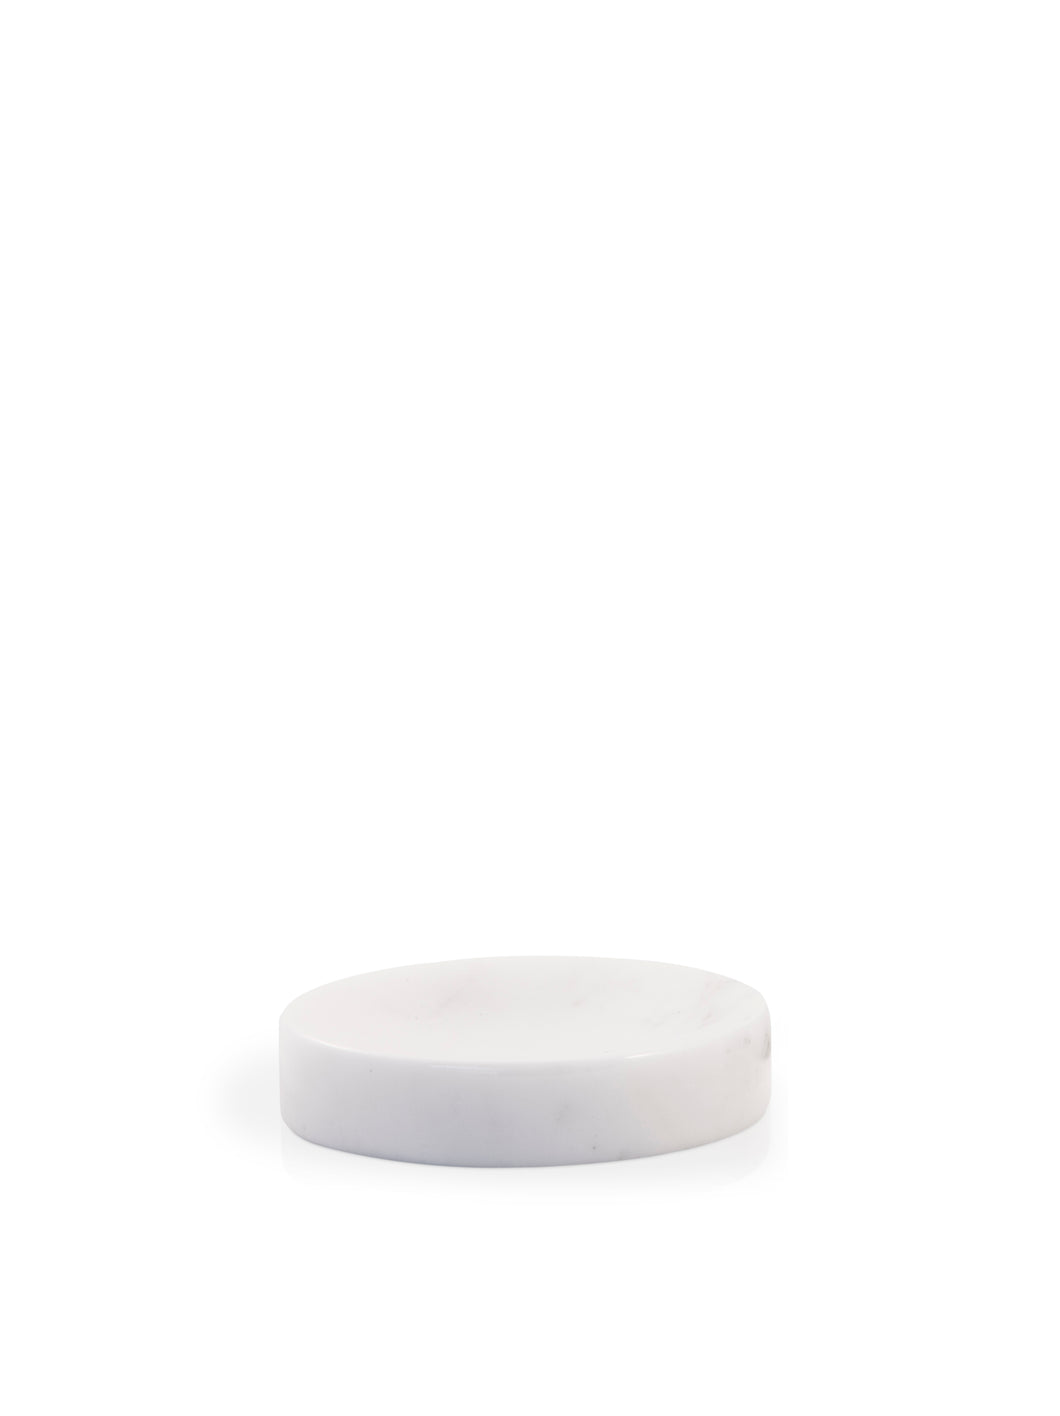 Rounded Soap Dish